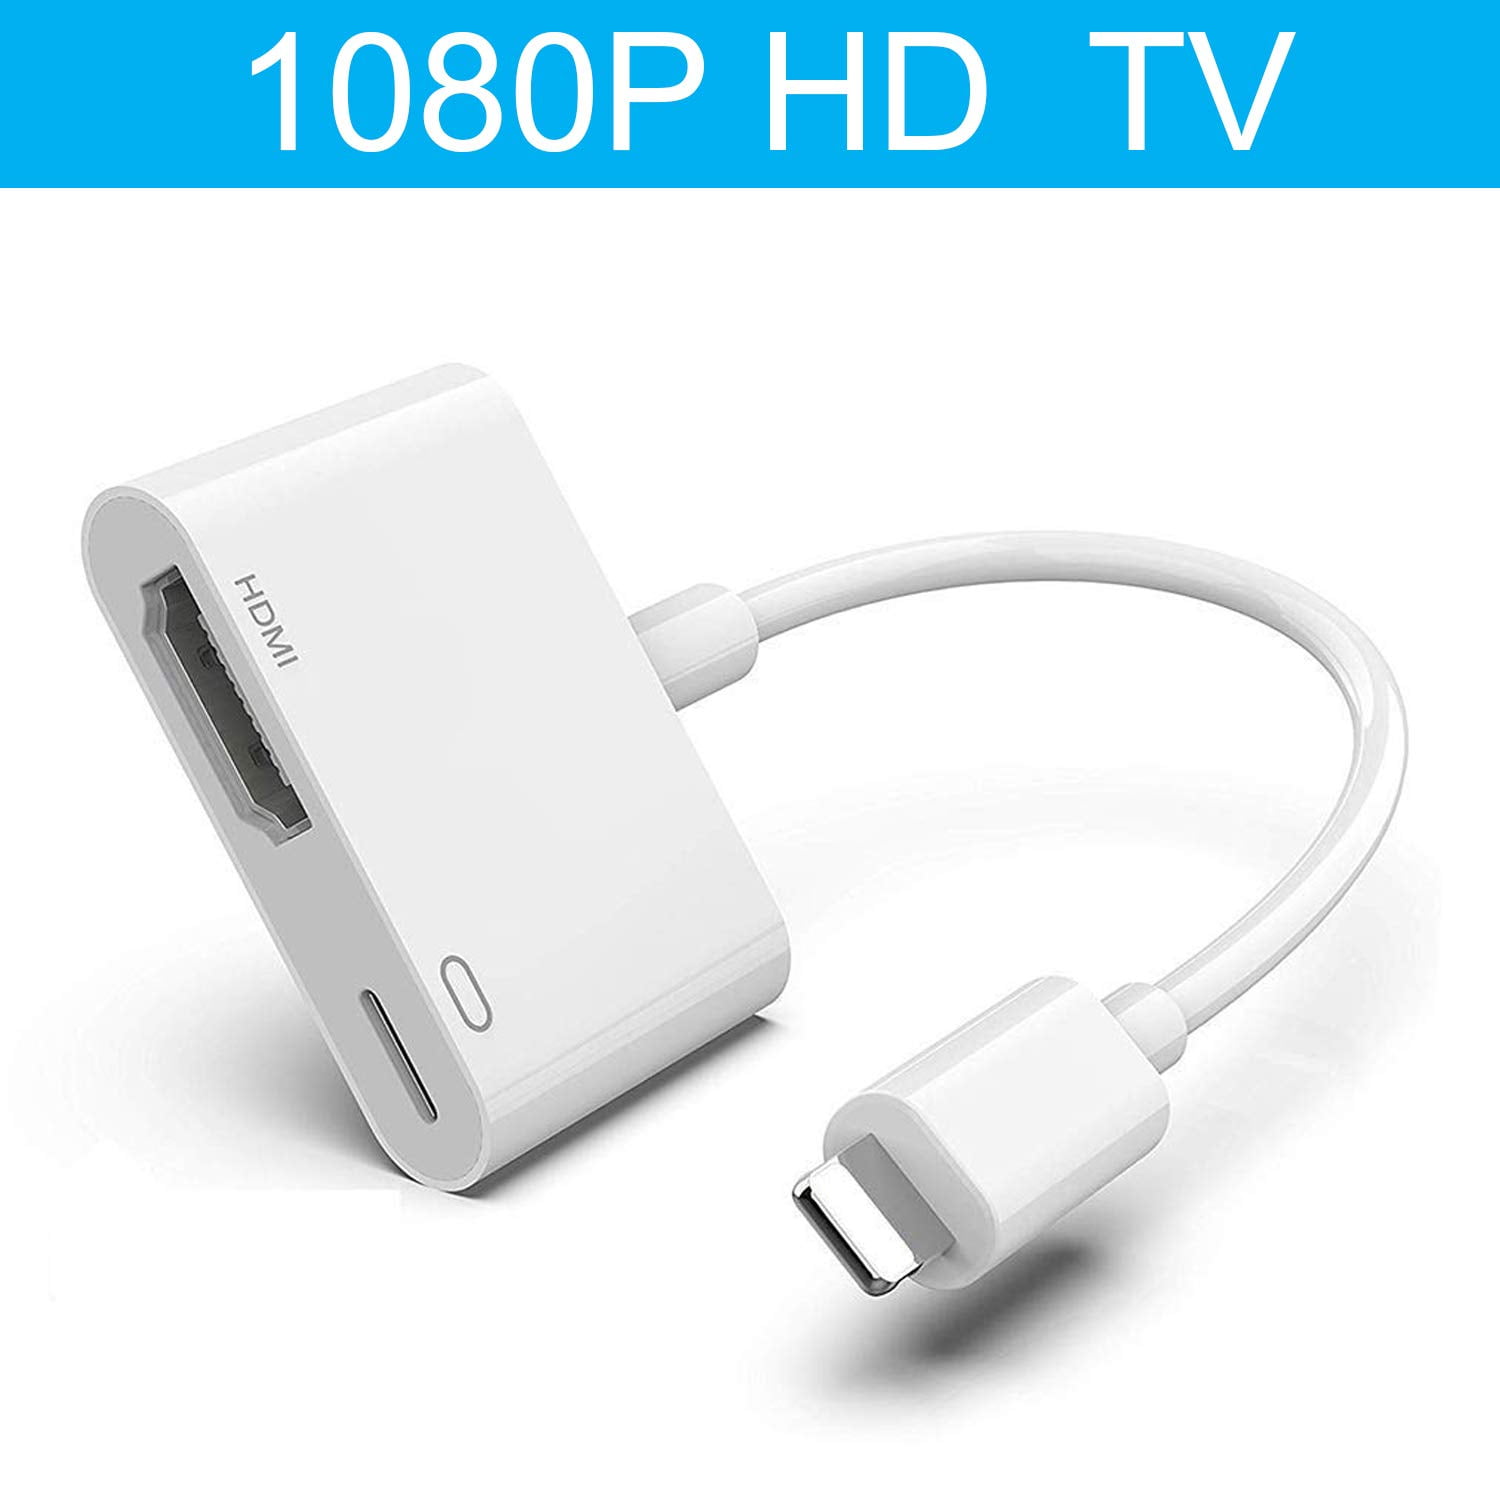 Apple Iphone to HDMI adapter – Props AV